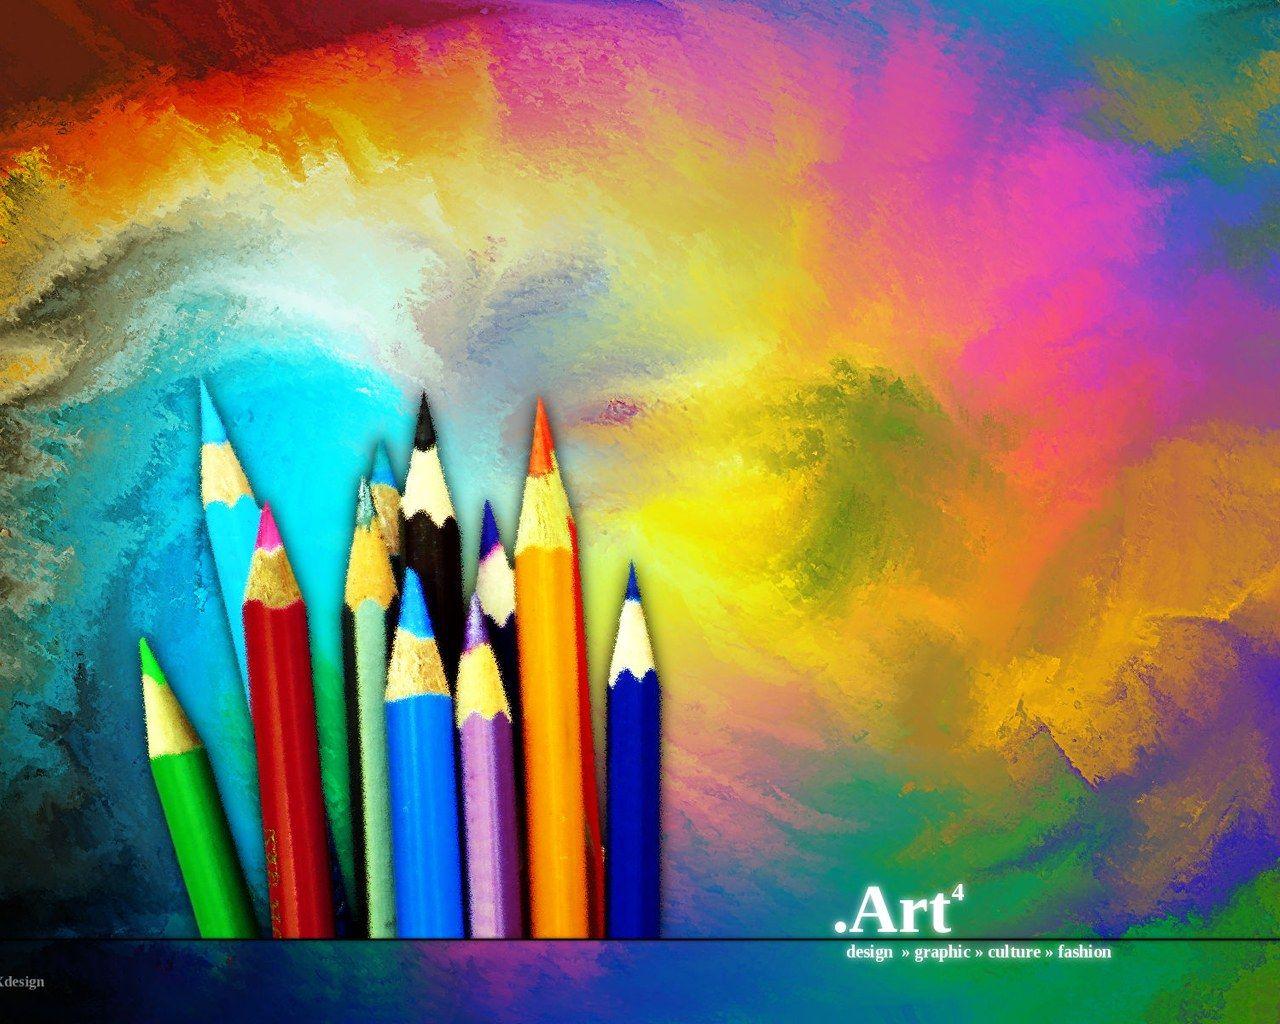 90 Background Design Art Images & Pictures - MyWeb